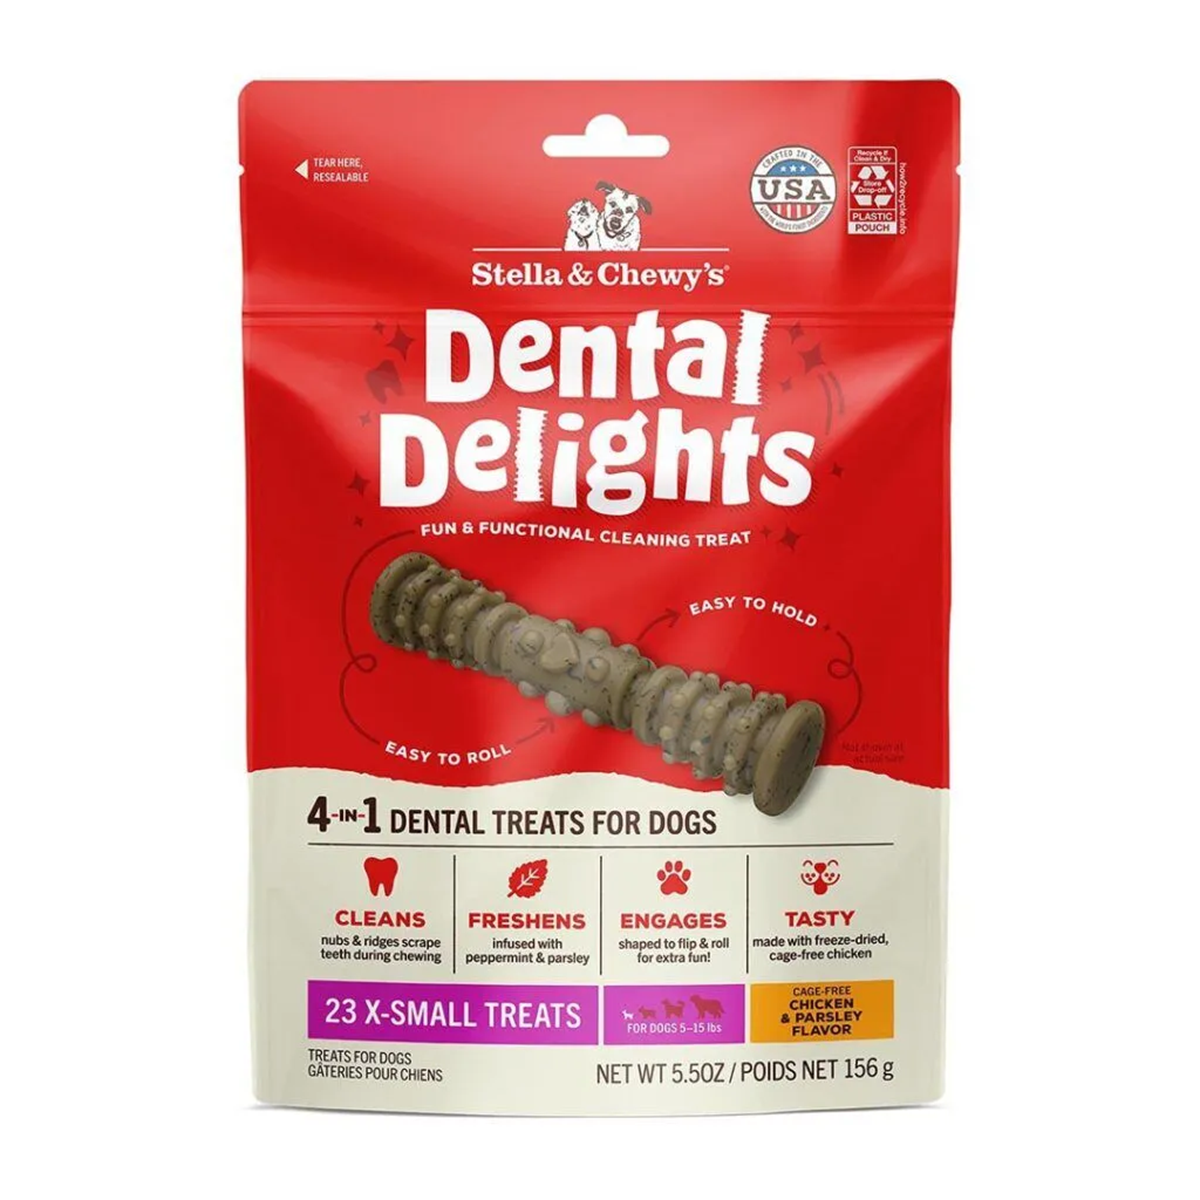 Stella & Chewy's Dental Delights Dog Treats - X-Small